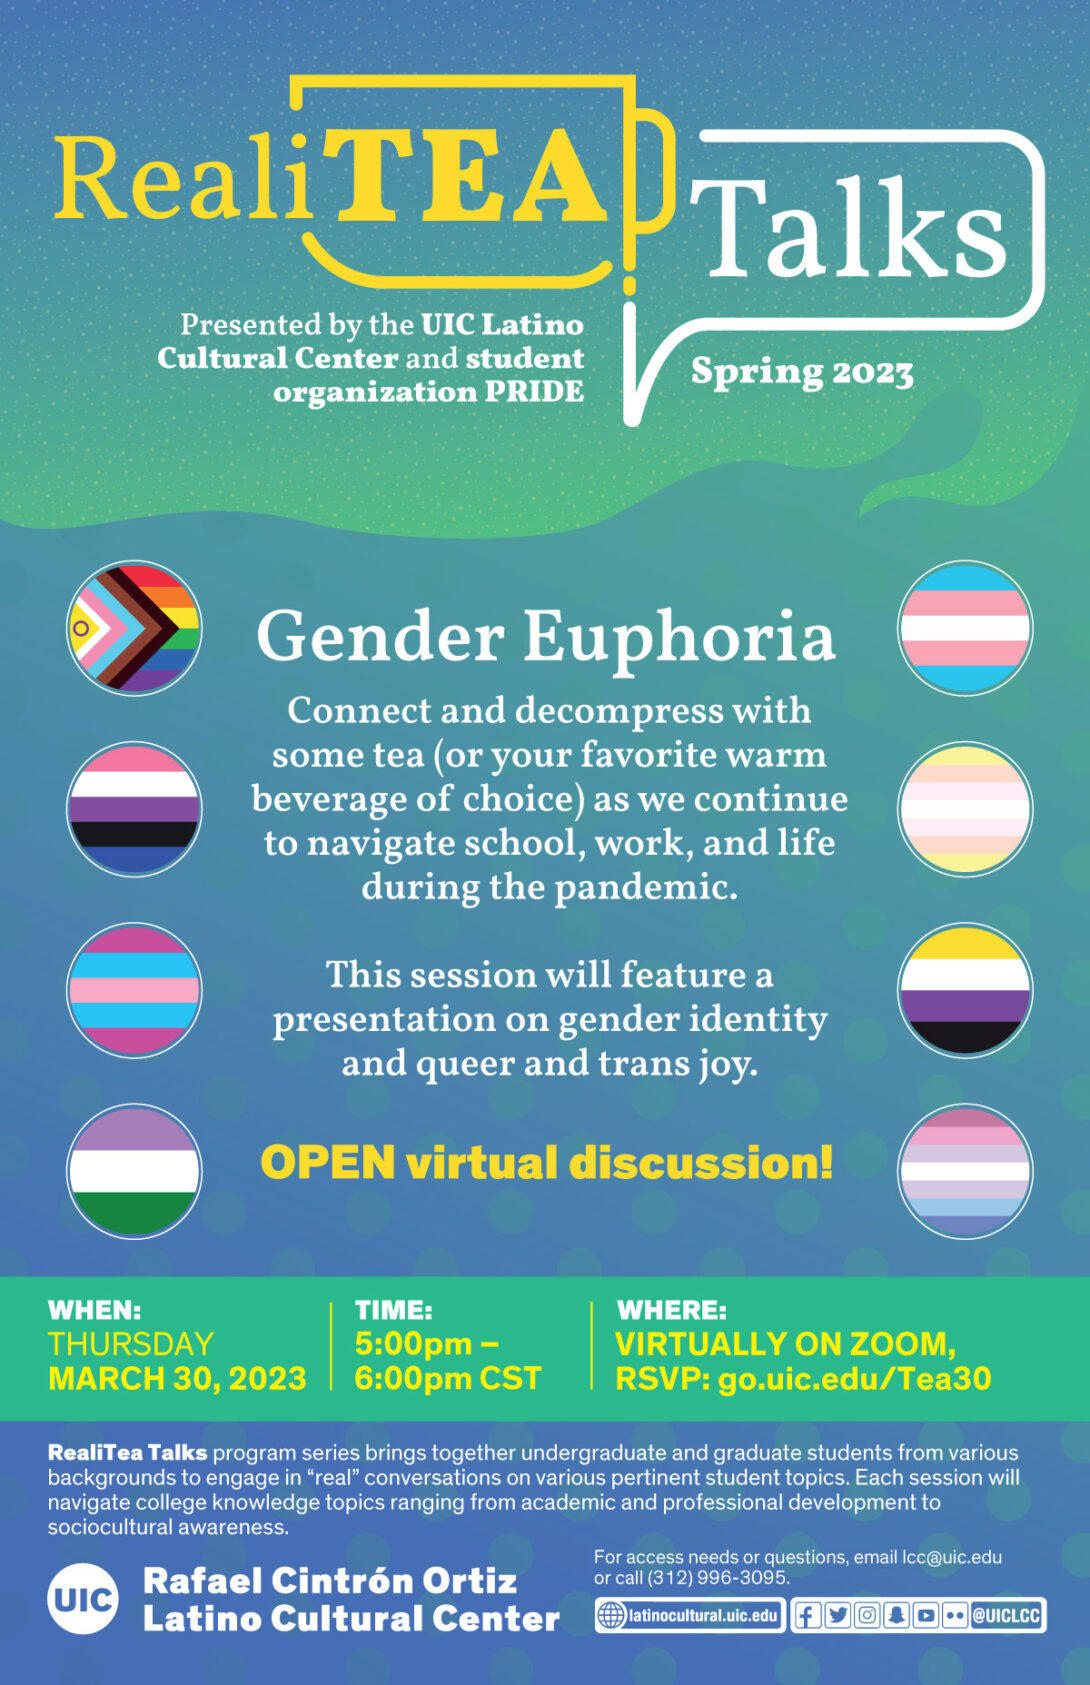 A blue and green ombre flyer for the RealiTEA Talks event with LGBTQIA+ flags on the sides of text. White text lists the description of the event, the hosts, details, and location. The UIC logo is shown in white at the bottom left corner next to the logo for the Rafael Cintron Ortiz Latino Cultural Center